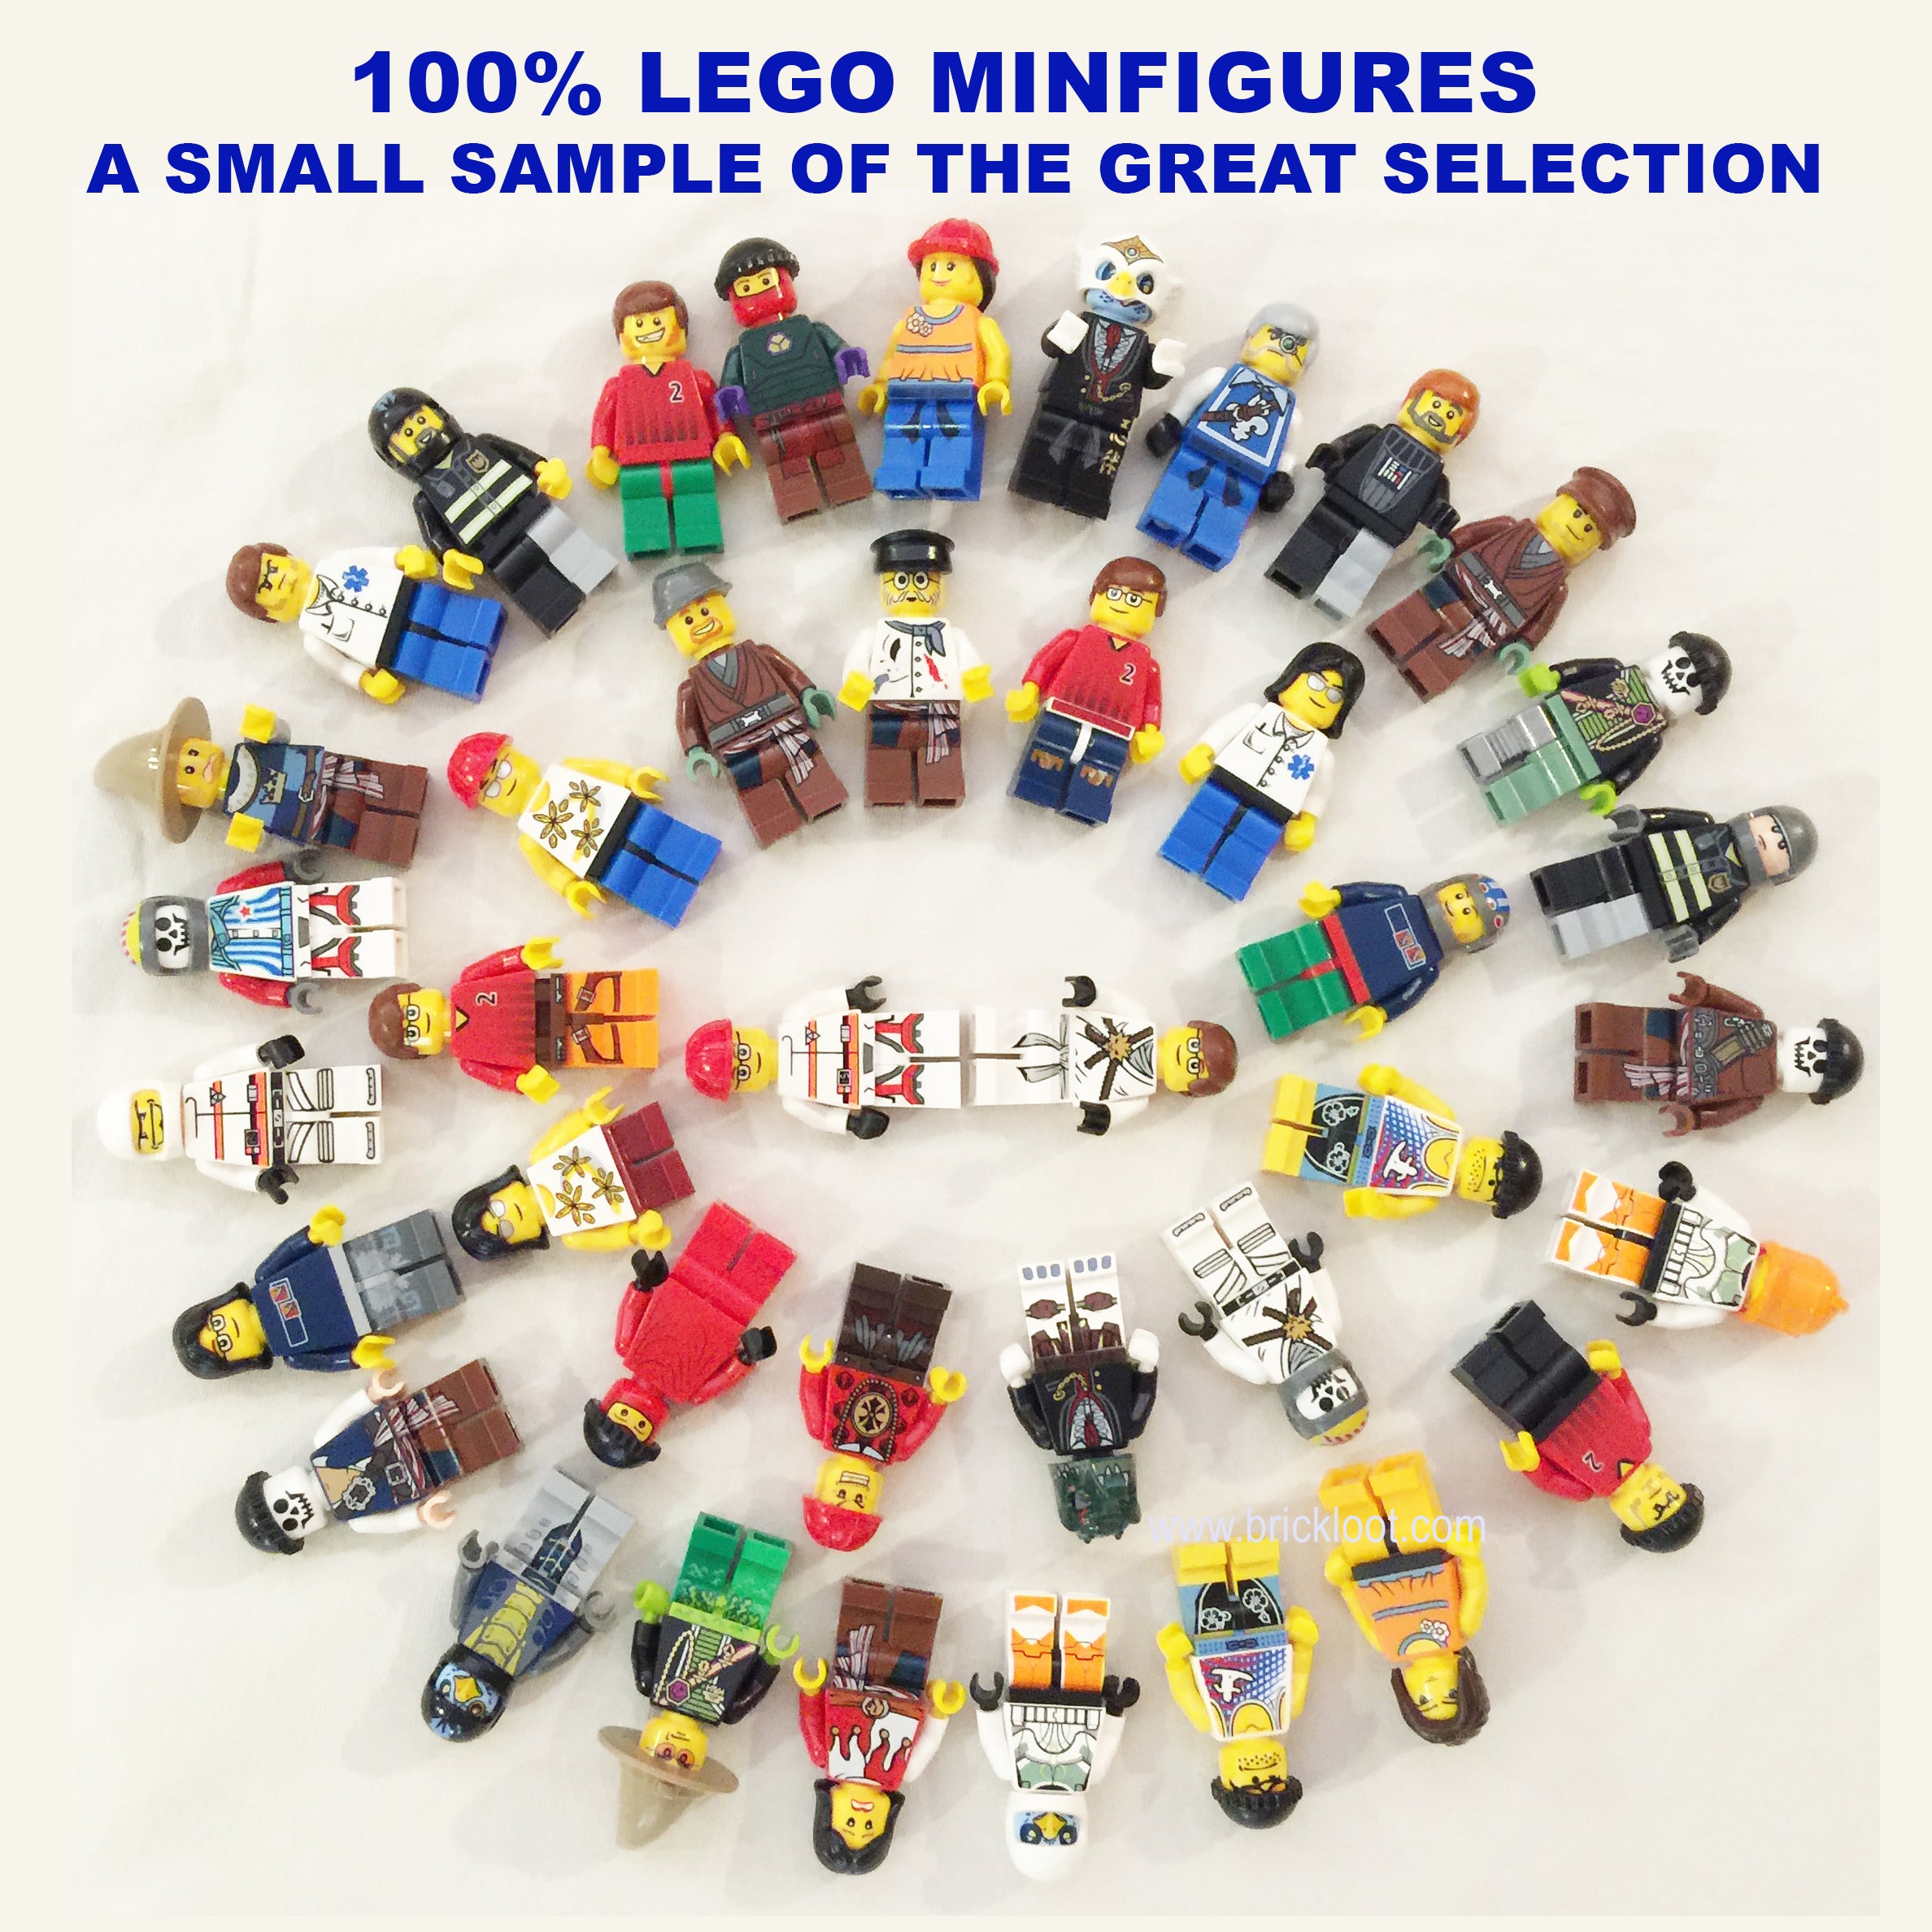 Restock! One of the most requested restocks is now available! #lego #